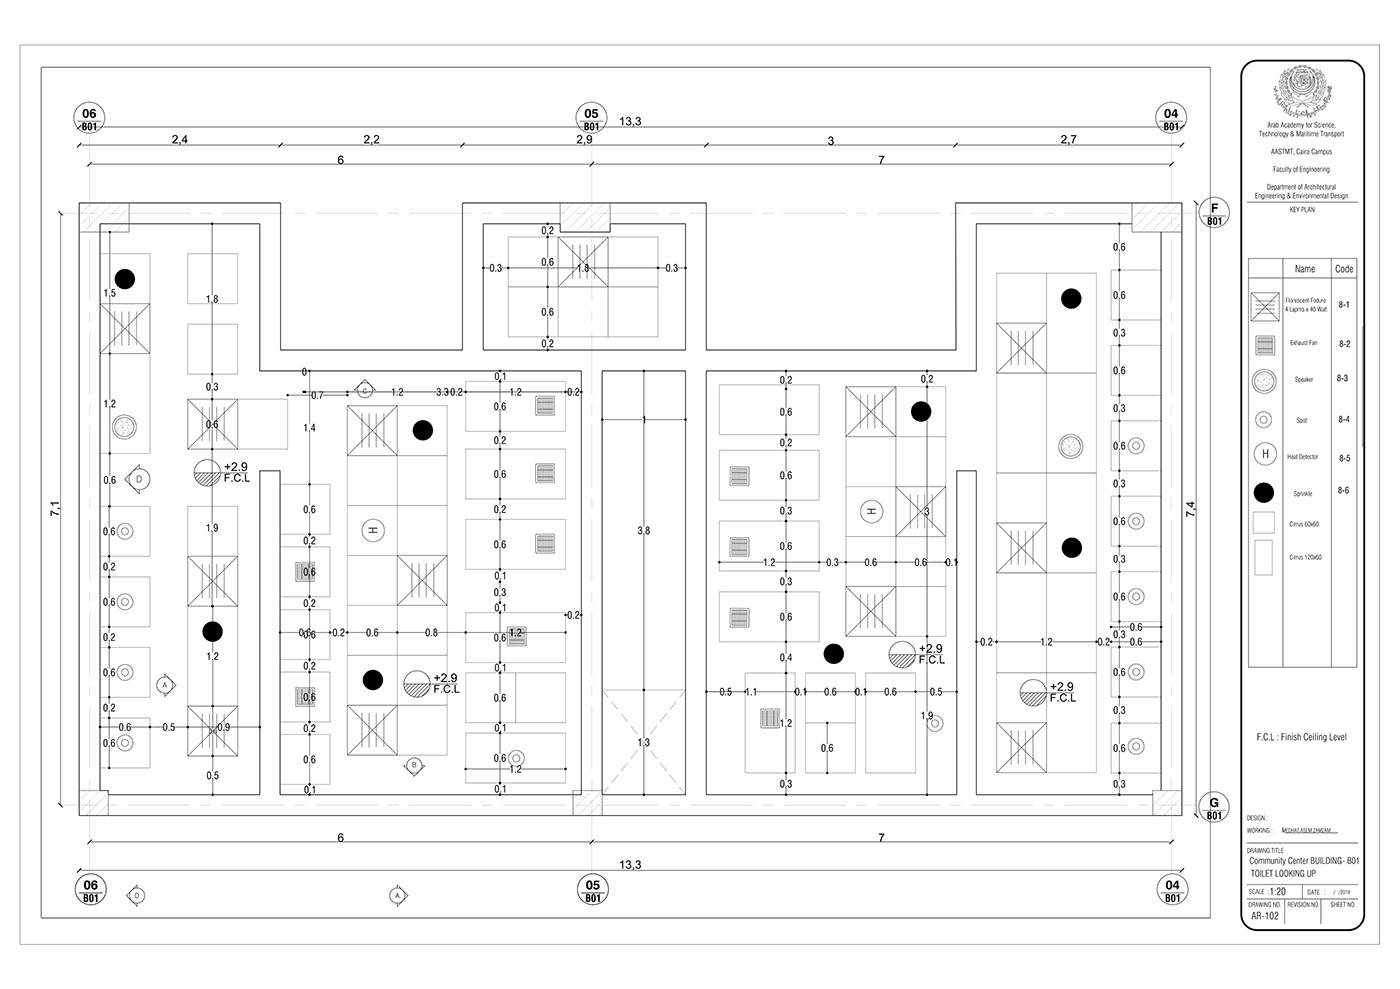 Data sheets shop drawings section Plan blowup Interior furniture working